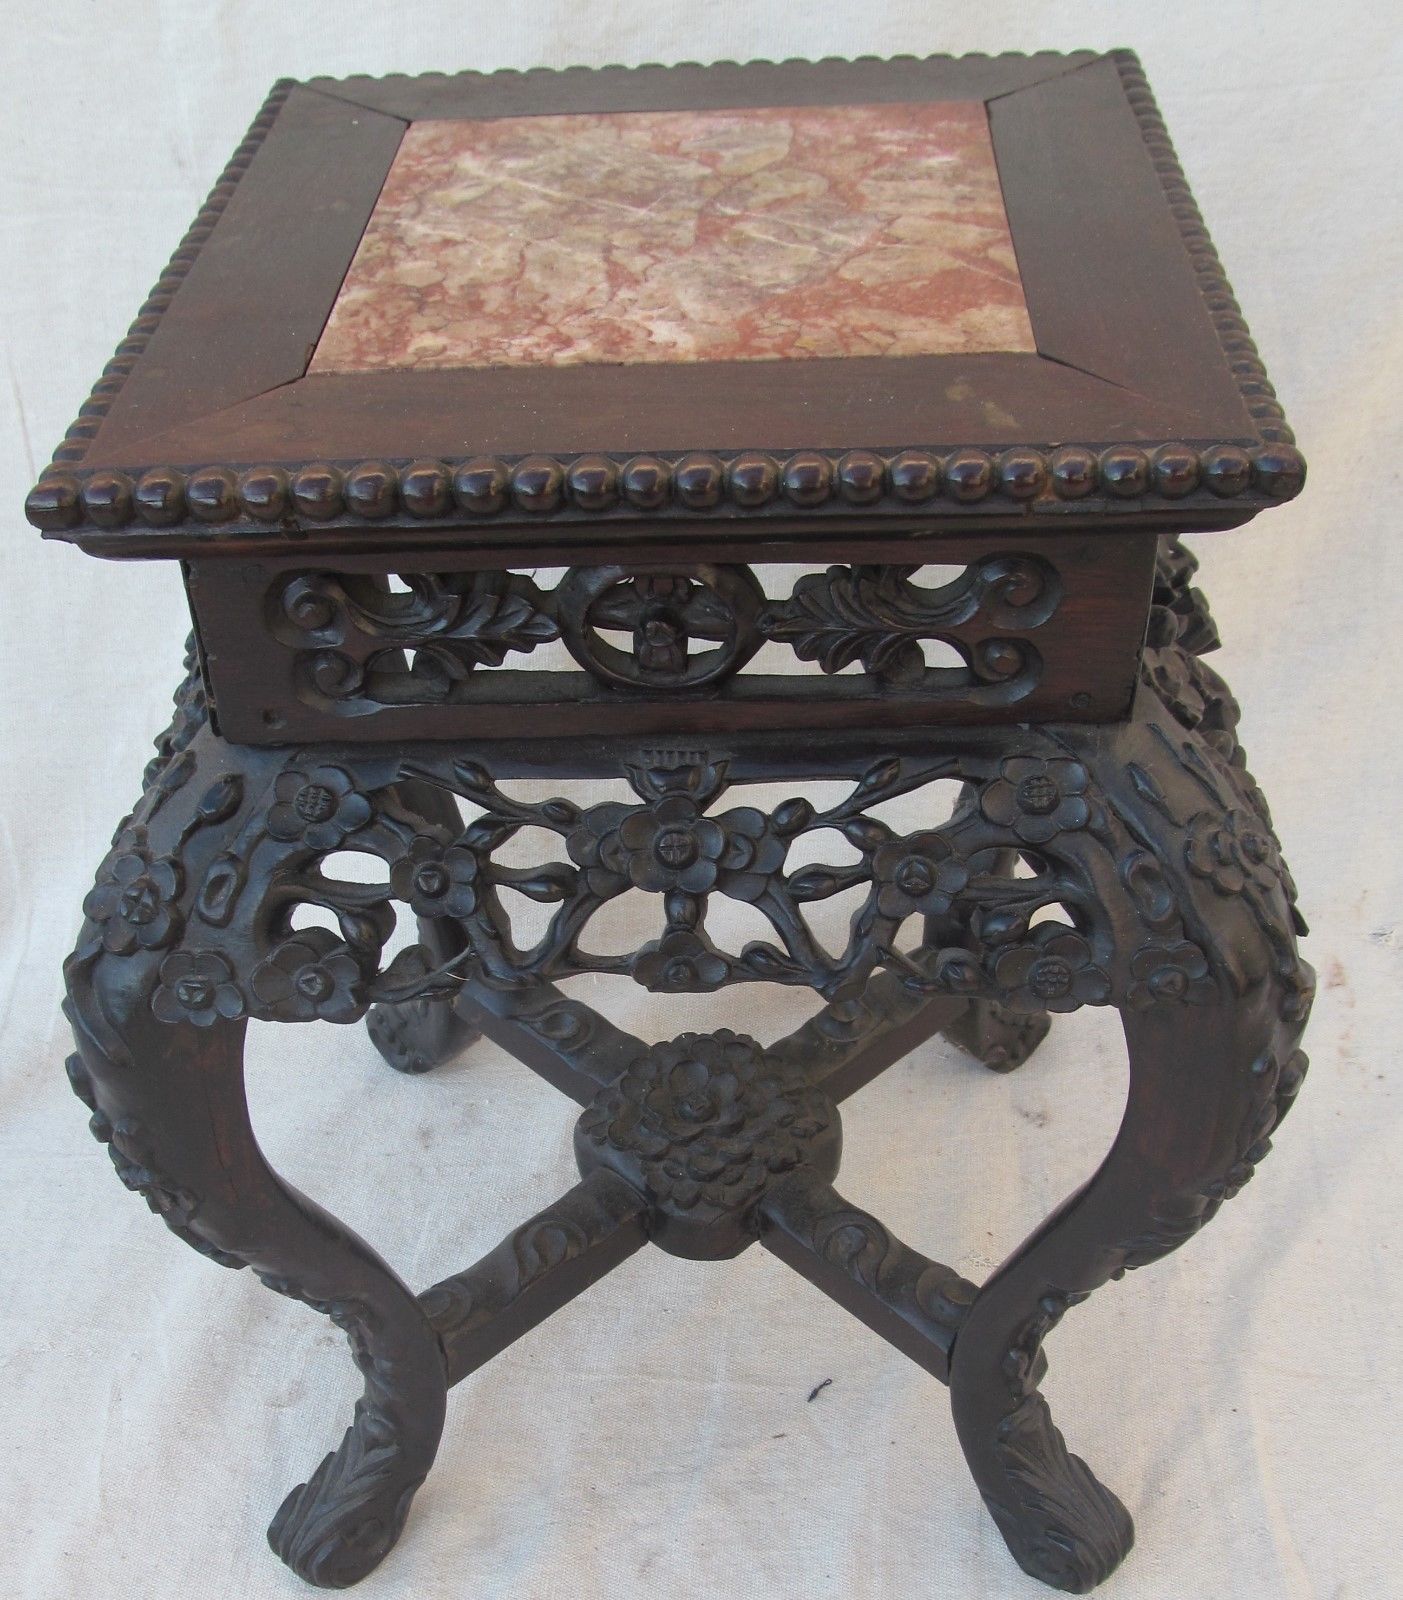 FINE 19TH CENTURY CARVED ROSEWOOD & PINK MARBLE CHINESE TABORET TABLE STAND